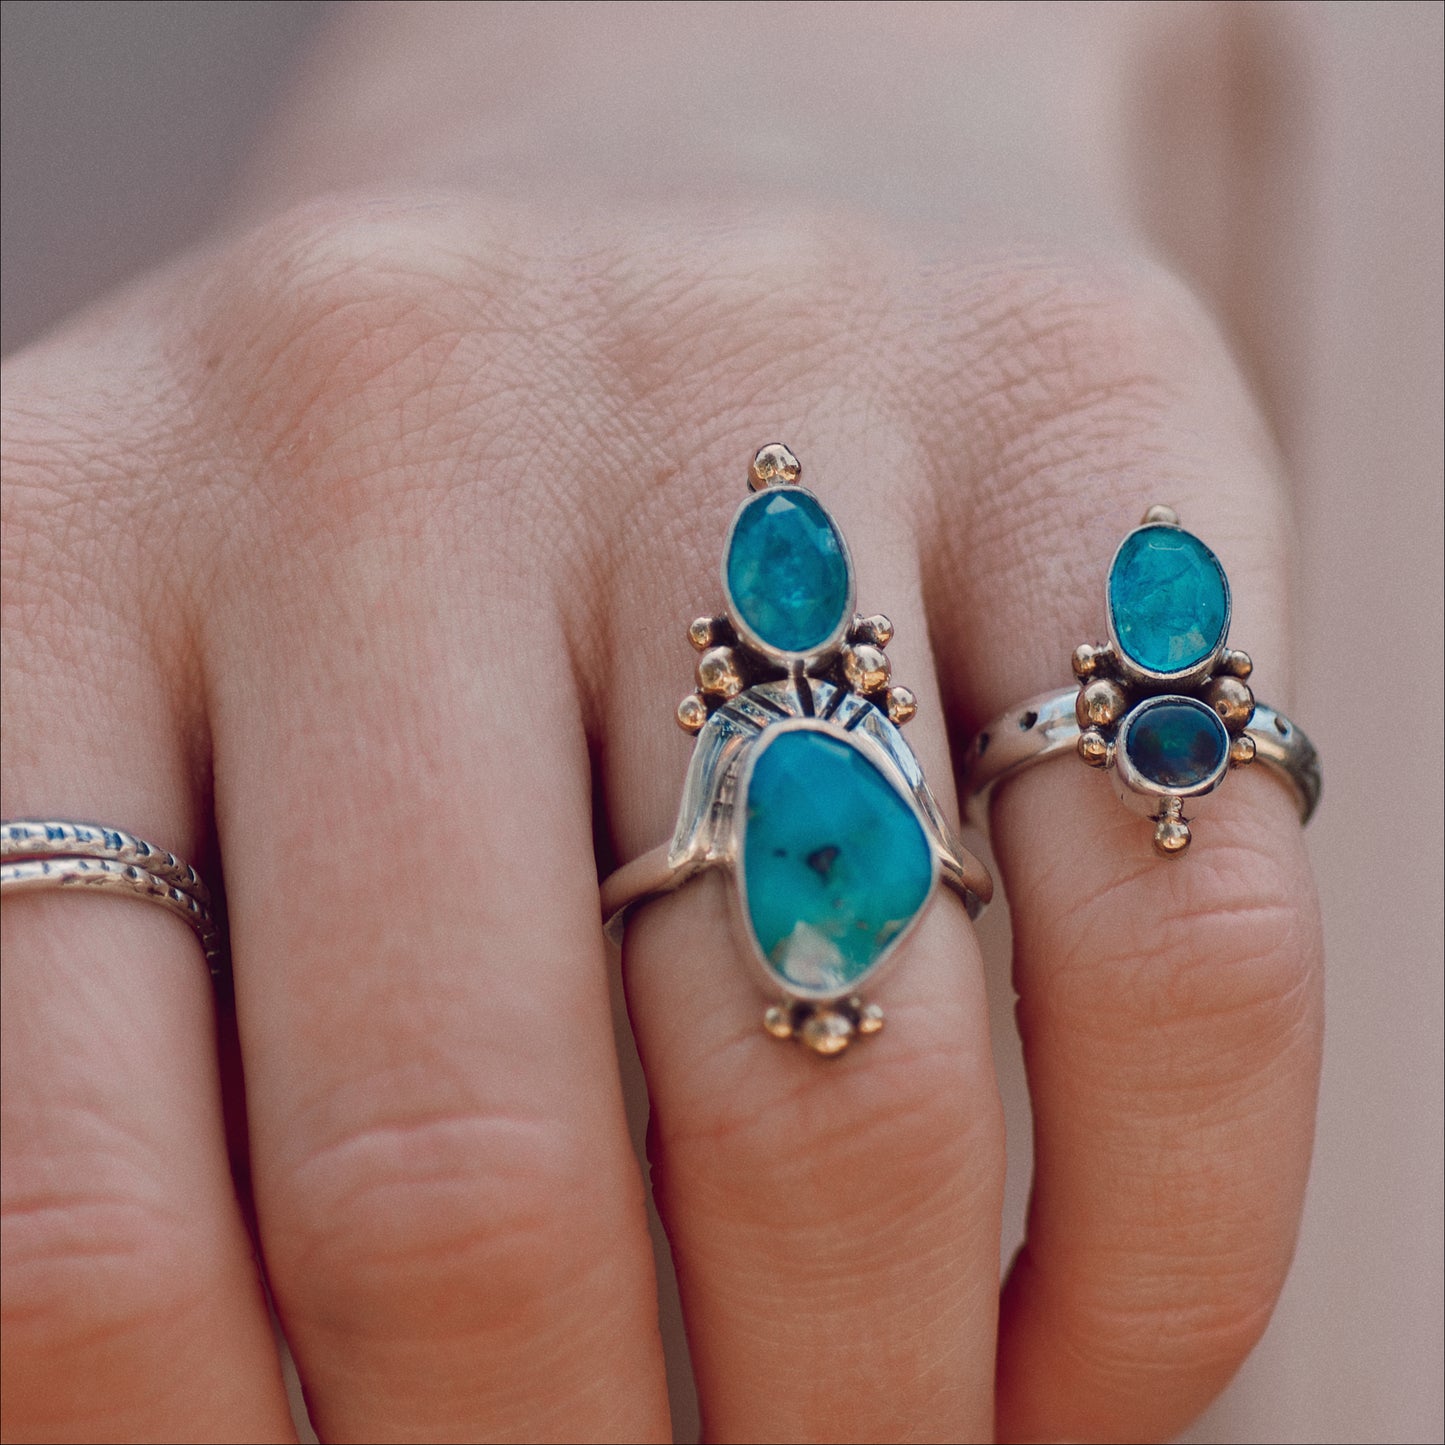 Kindred Embrace Ring (D) ◇ Faceted Turquoise + Faceted Blue Apatite ◇ Size 7.5